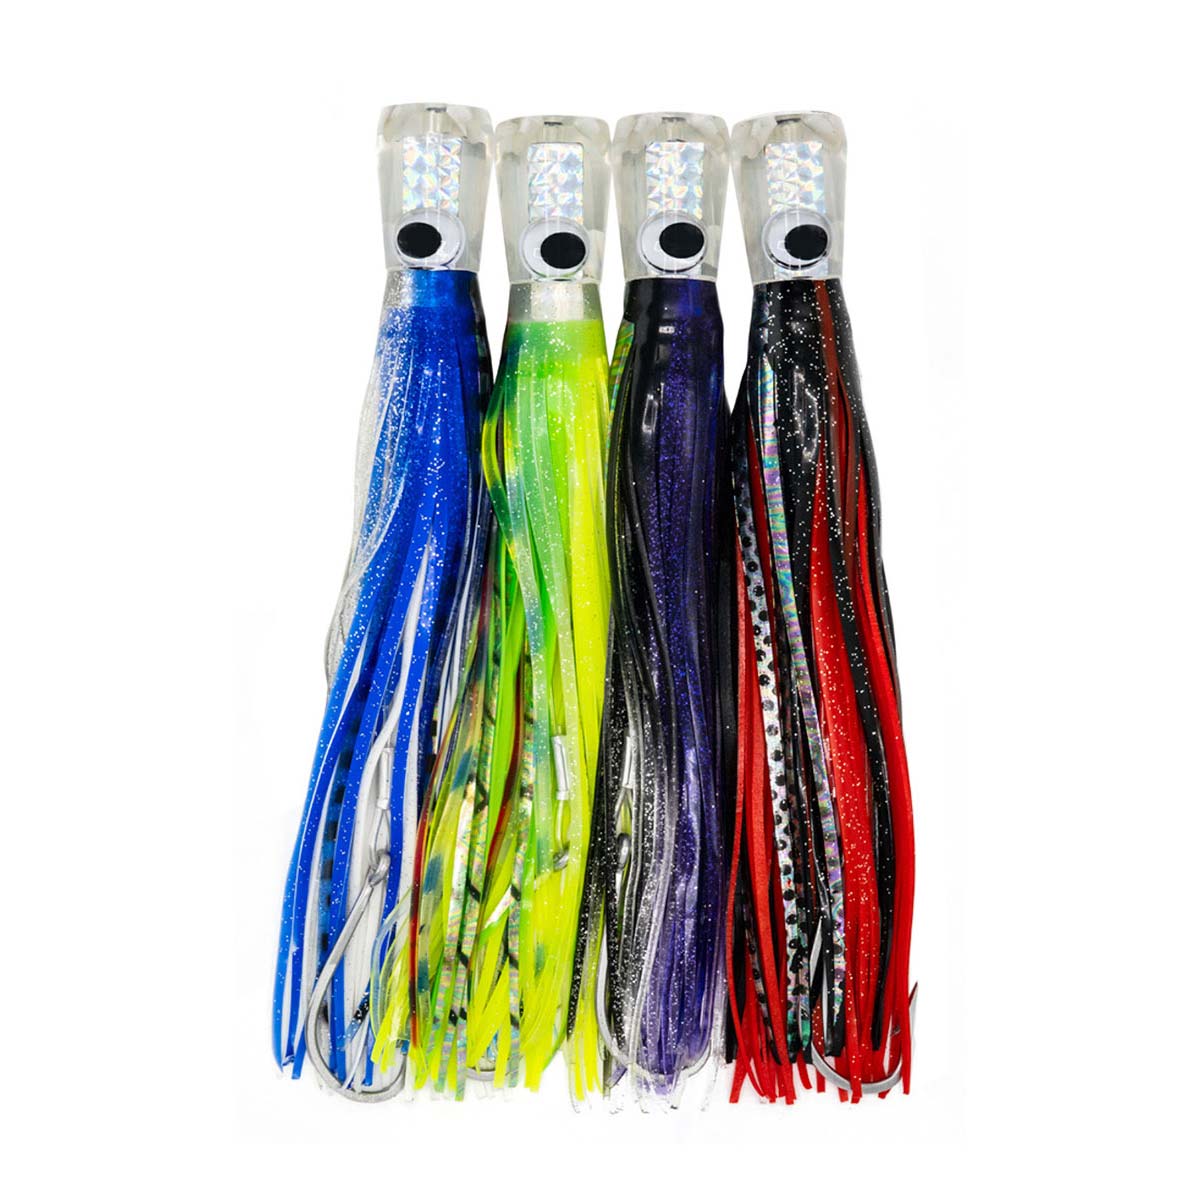 11 Jet Head Trolling Lures Set of Four – Rite Angler